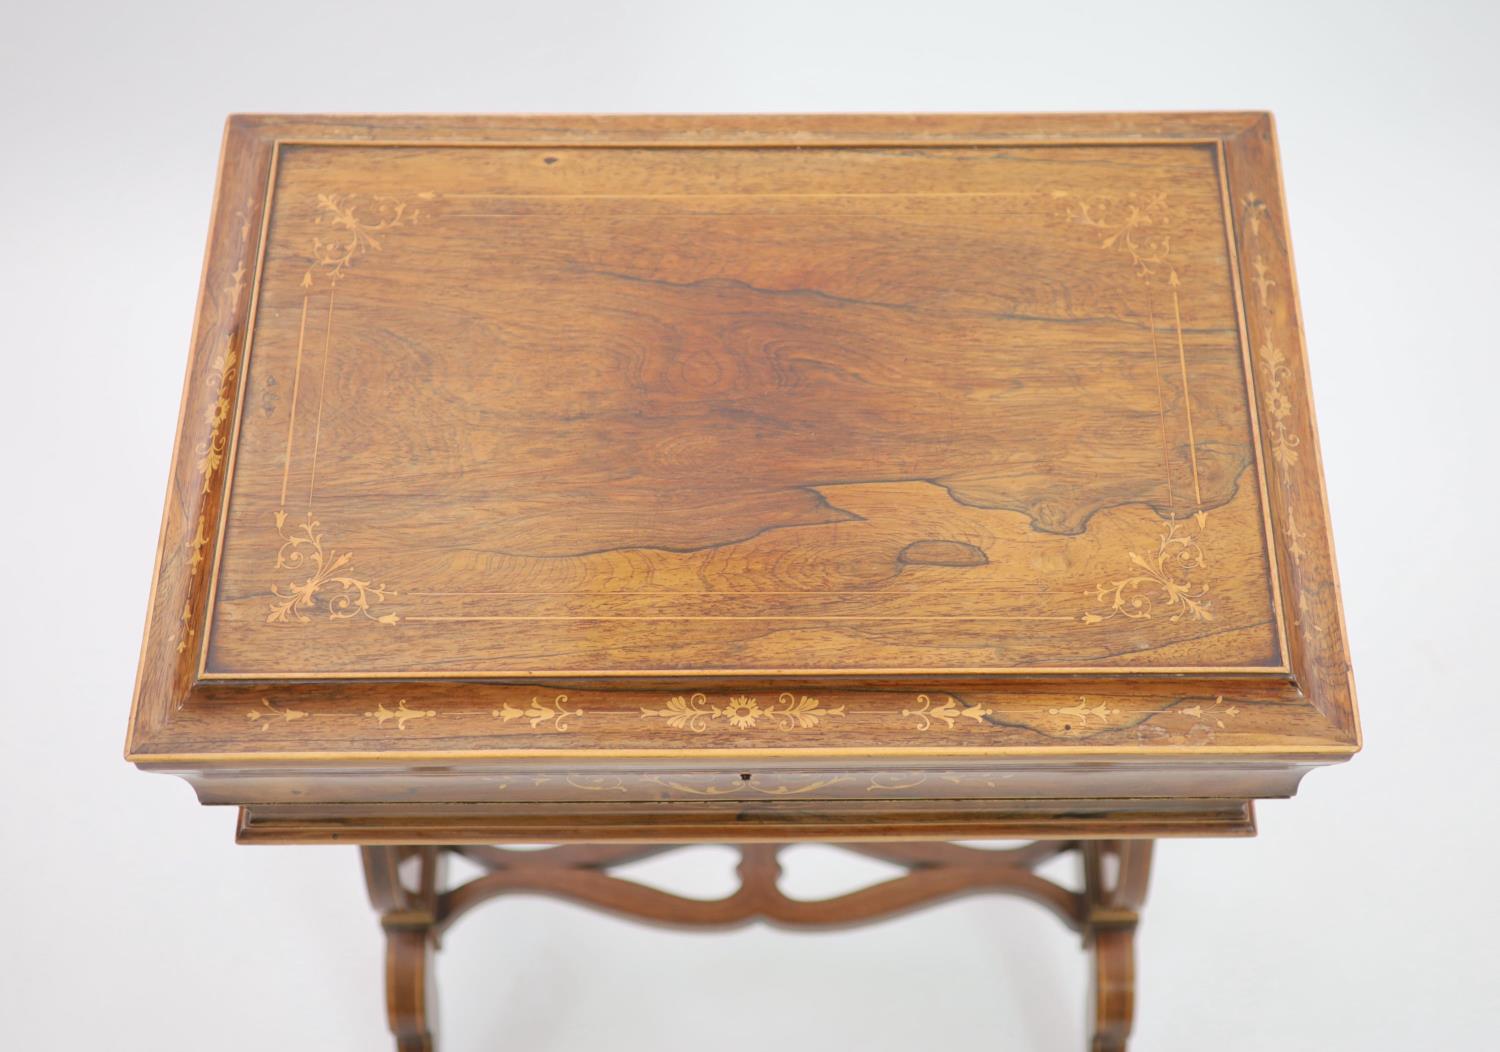 A 19th century French rosewood and sycamore lined lady's dressing table, c.1830, by Alphonse Giroux, - Image 6 of 6